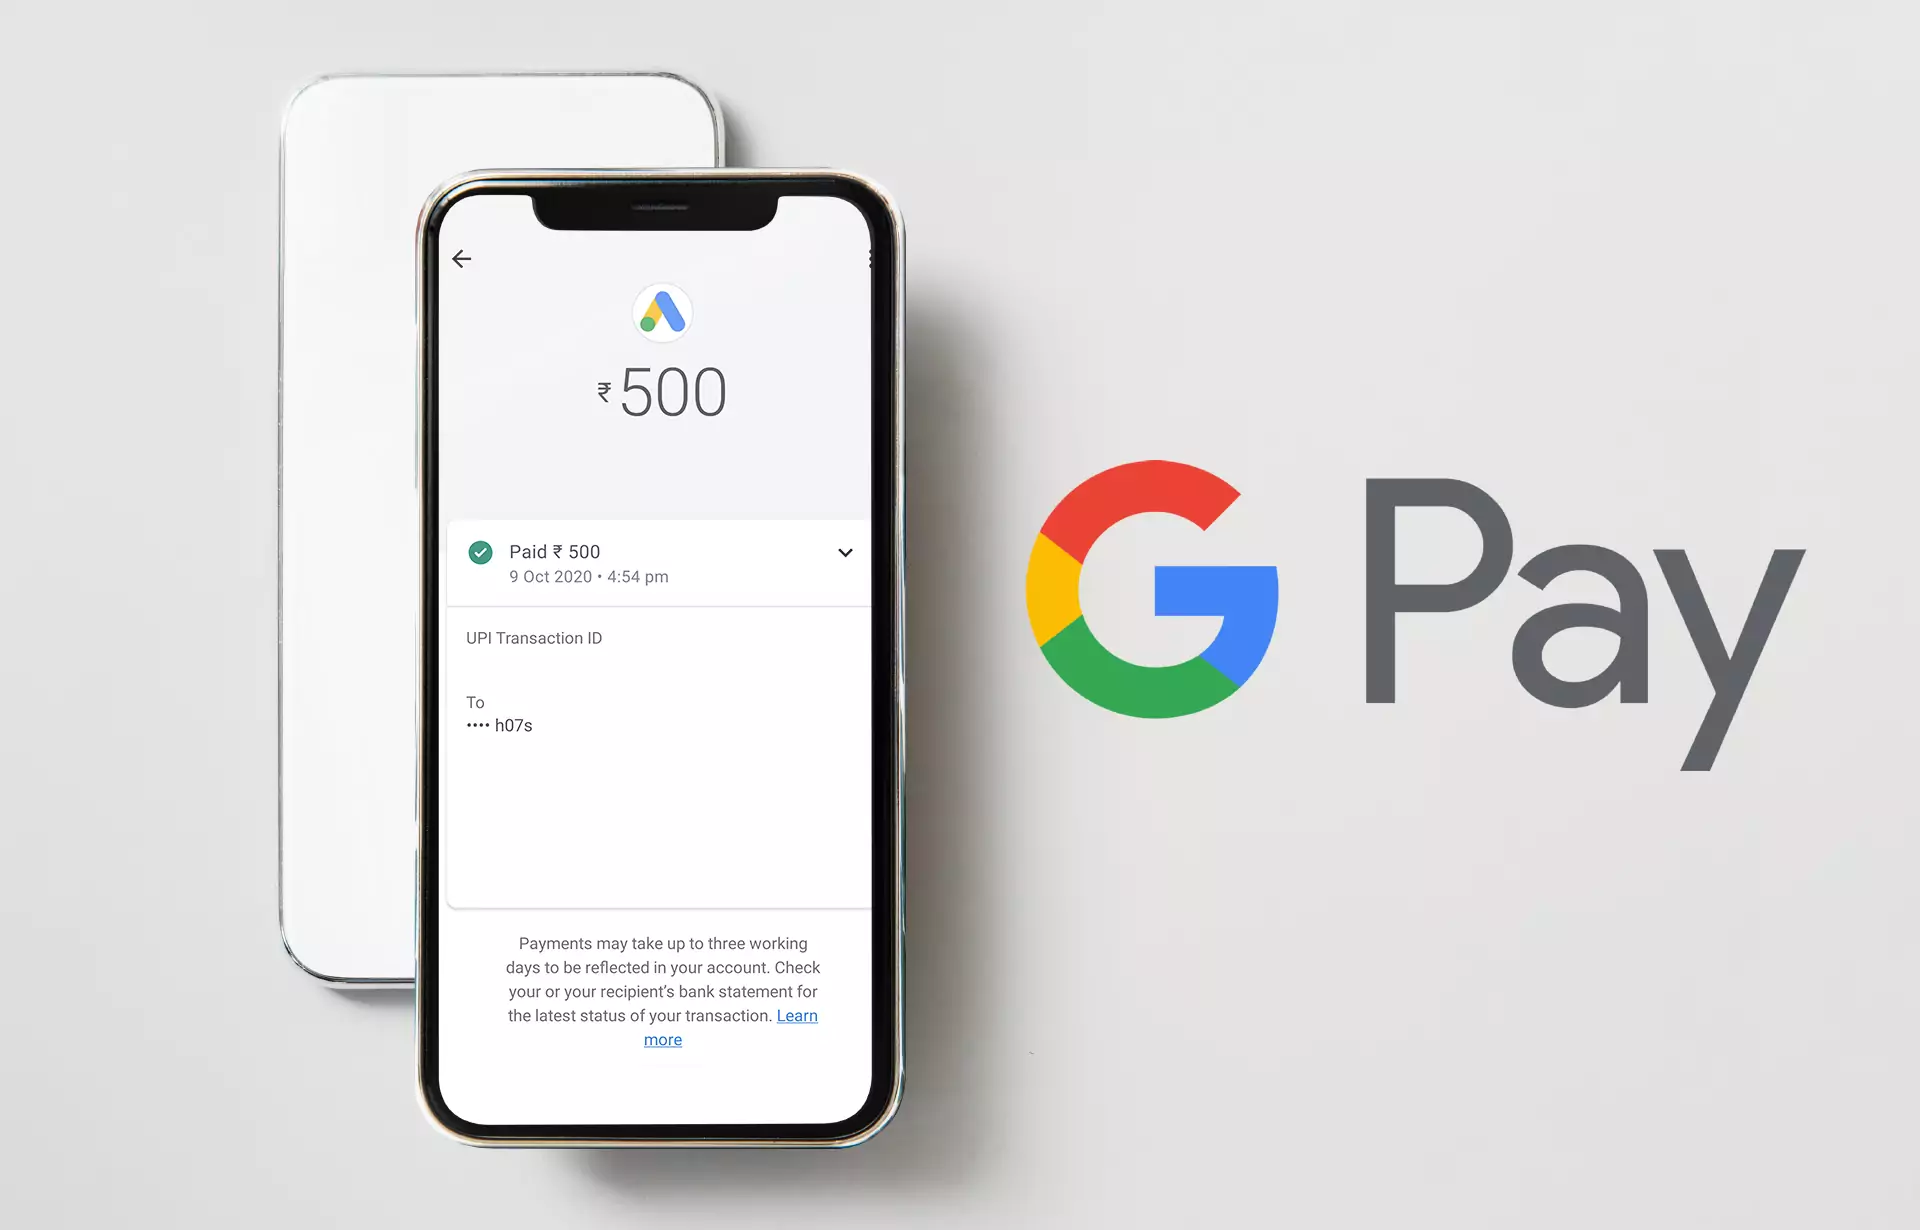 Google Pay is a digital e-wallet provided by Google.